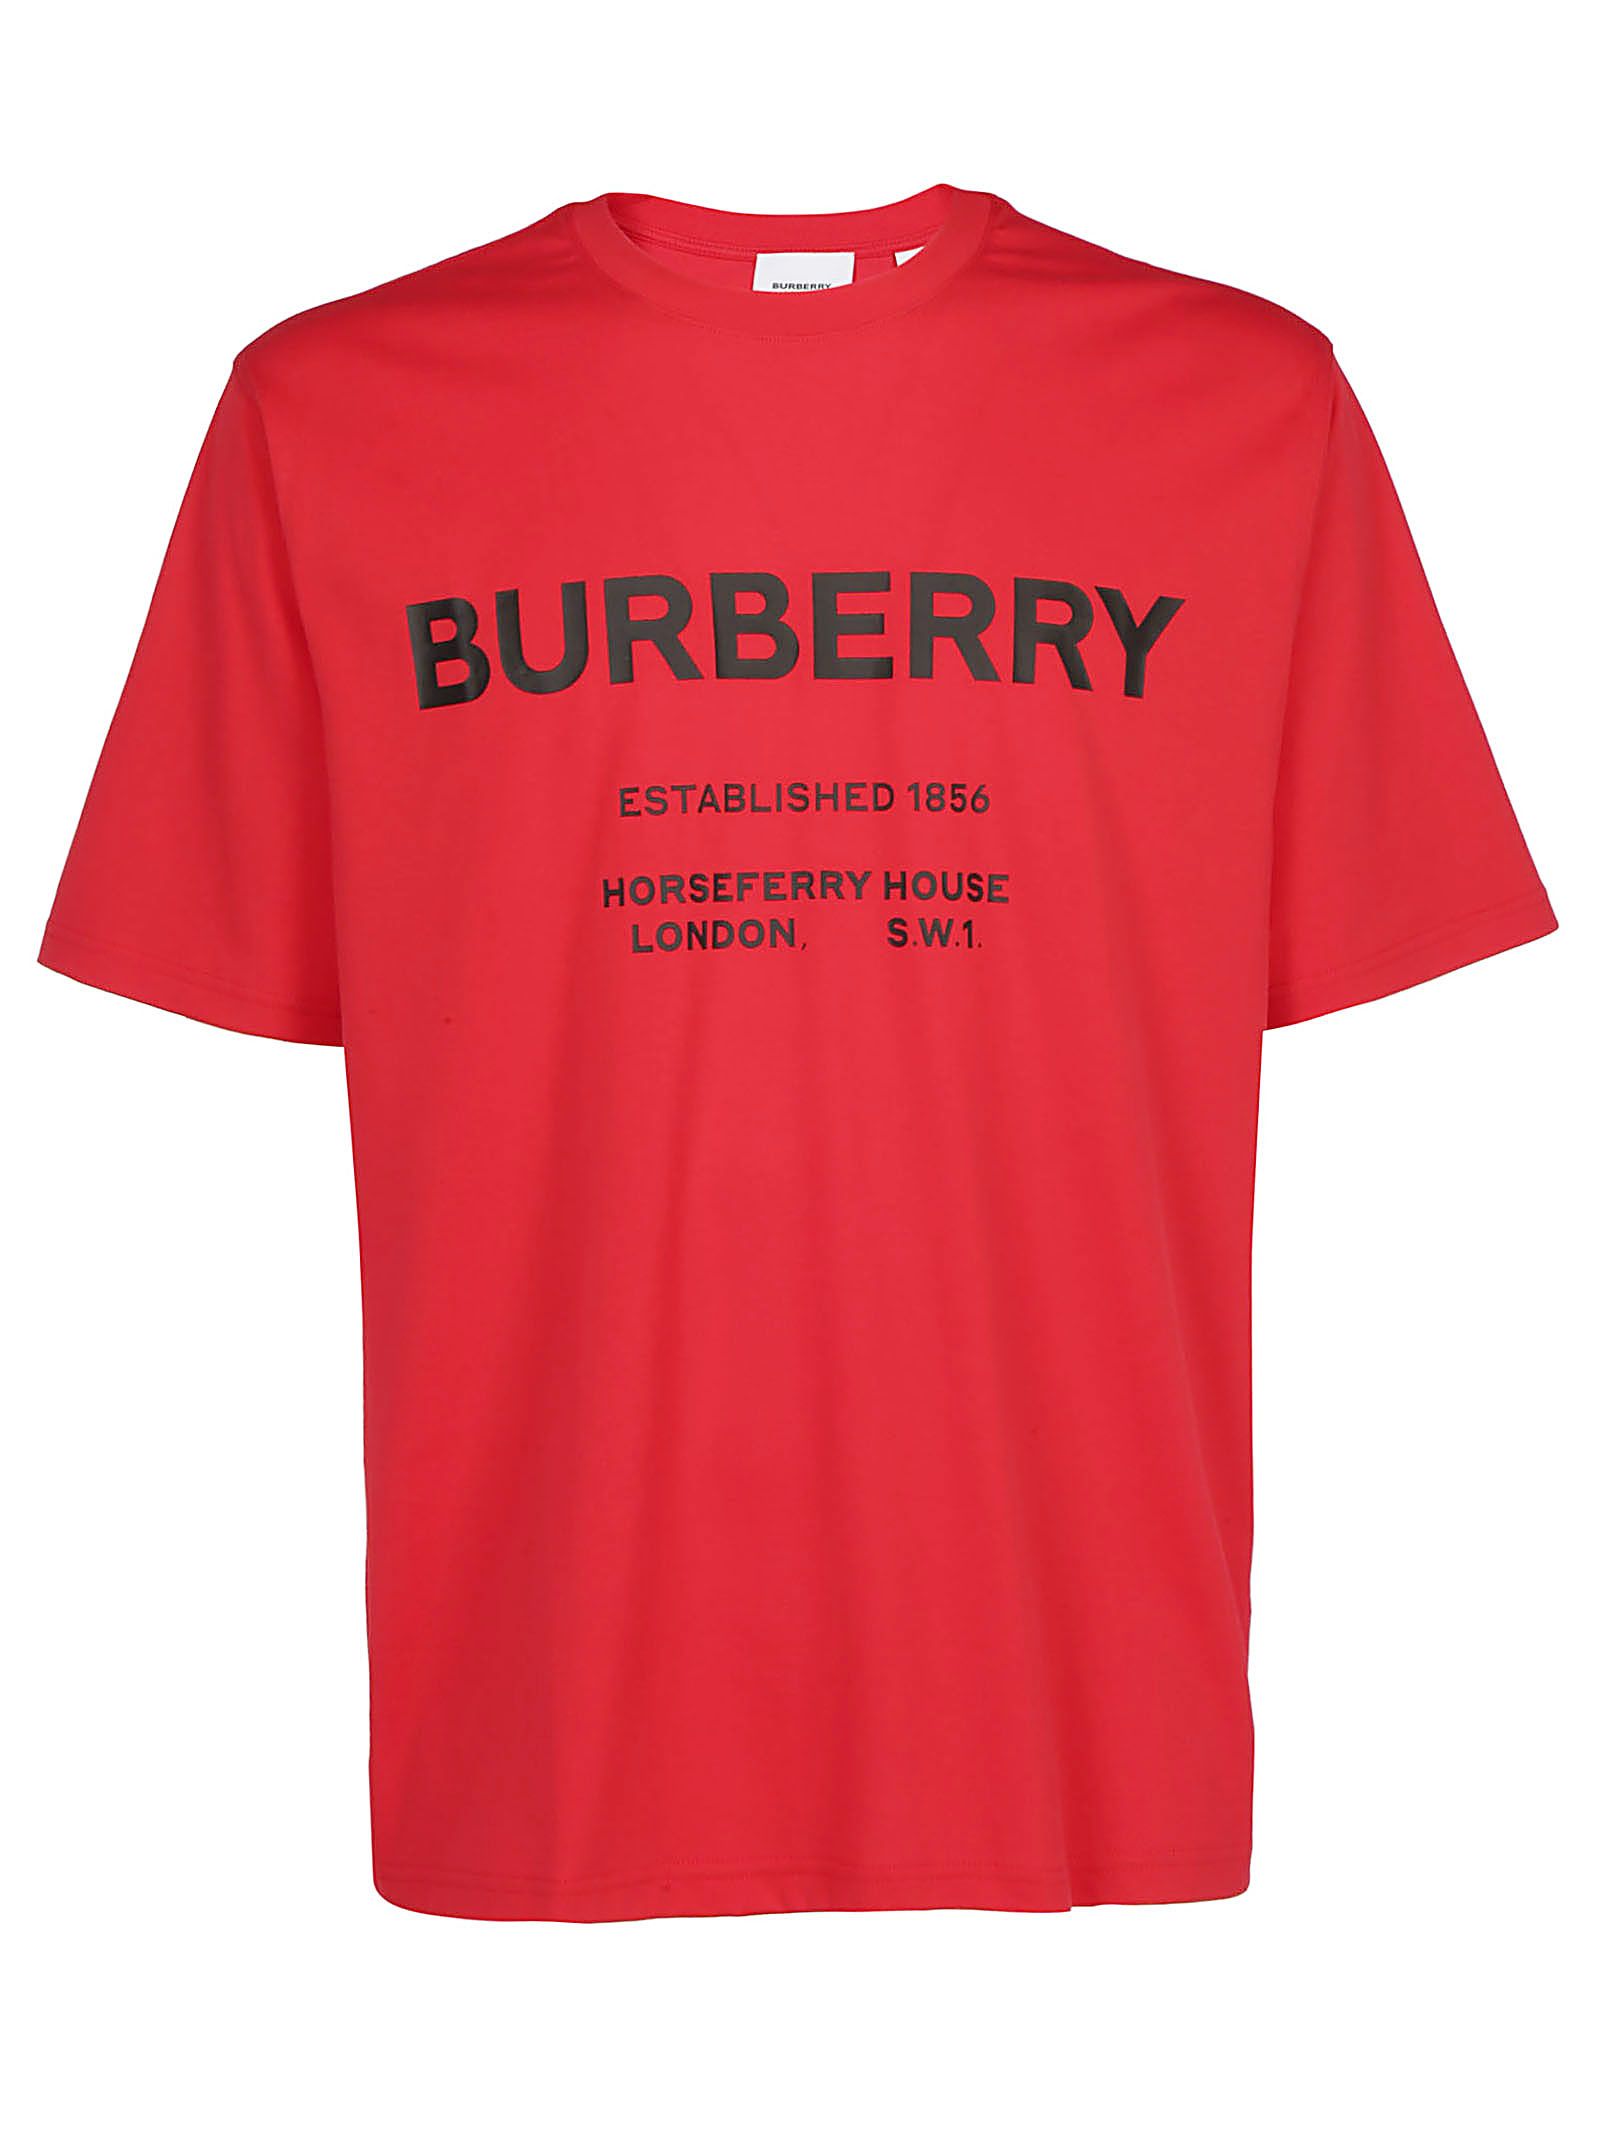 Burberry Murs T-shirt In Bright Red | ModeSens